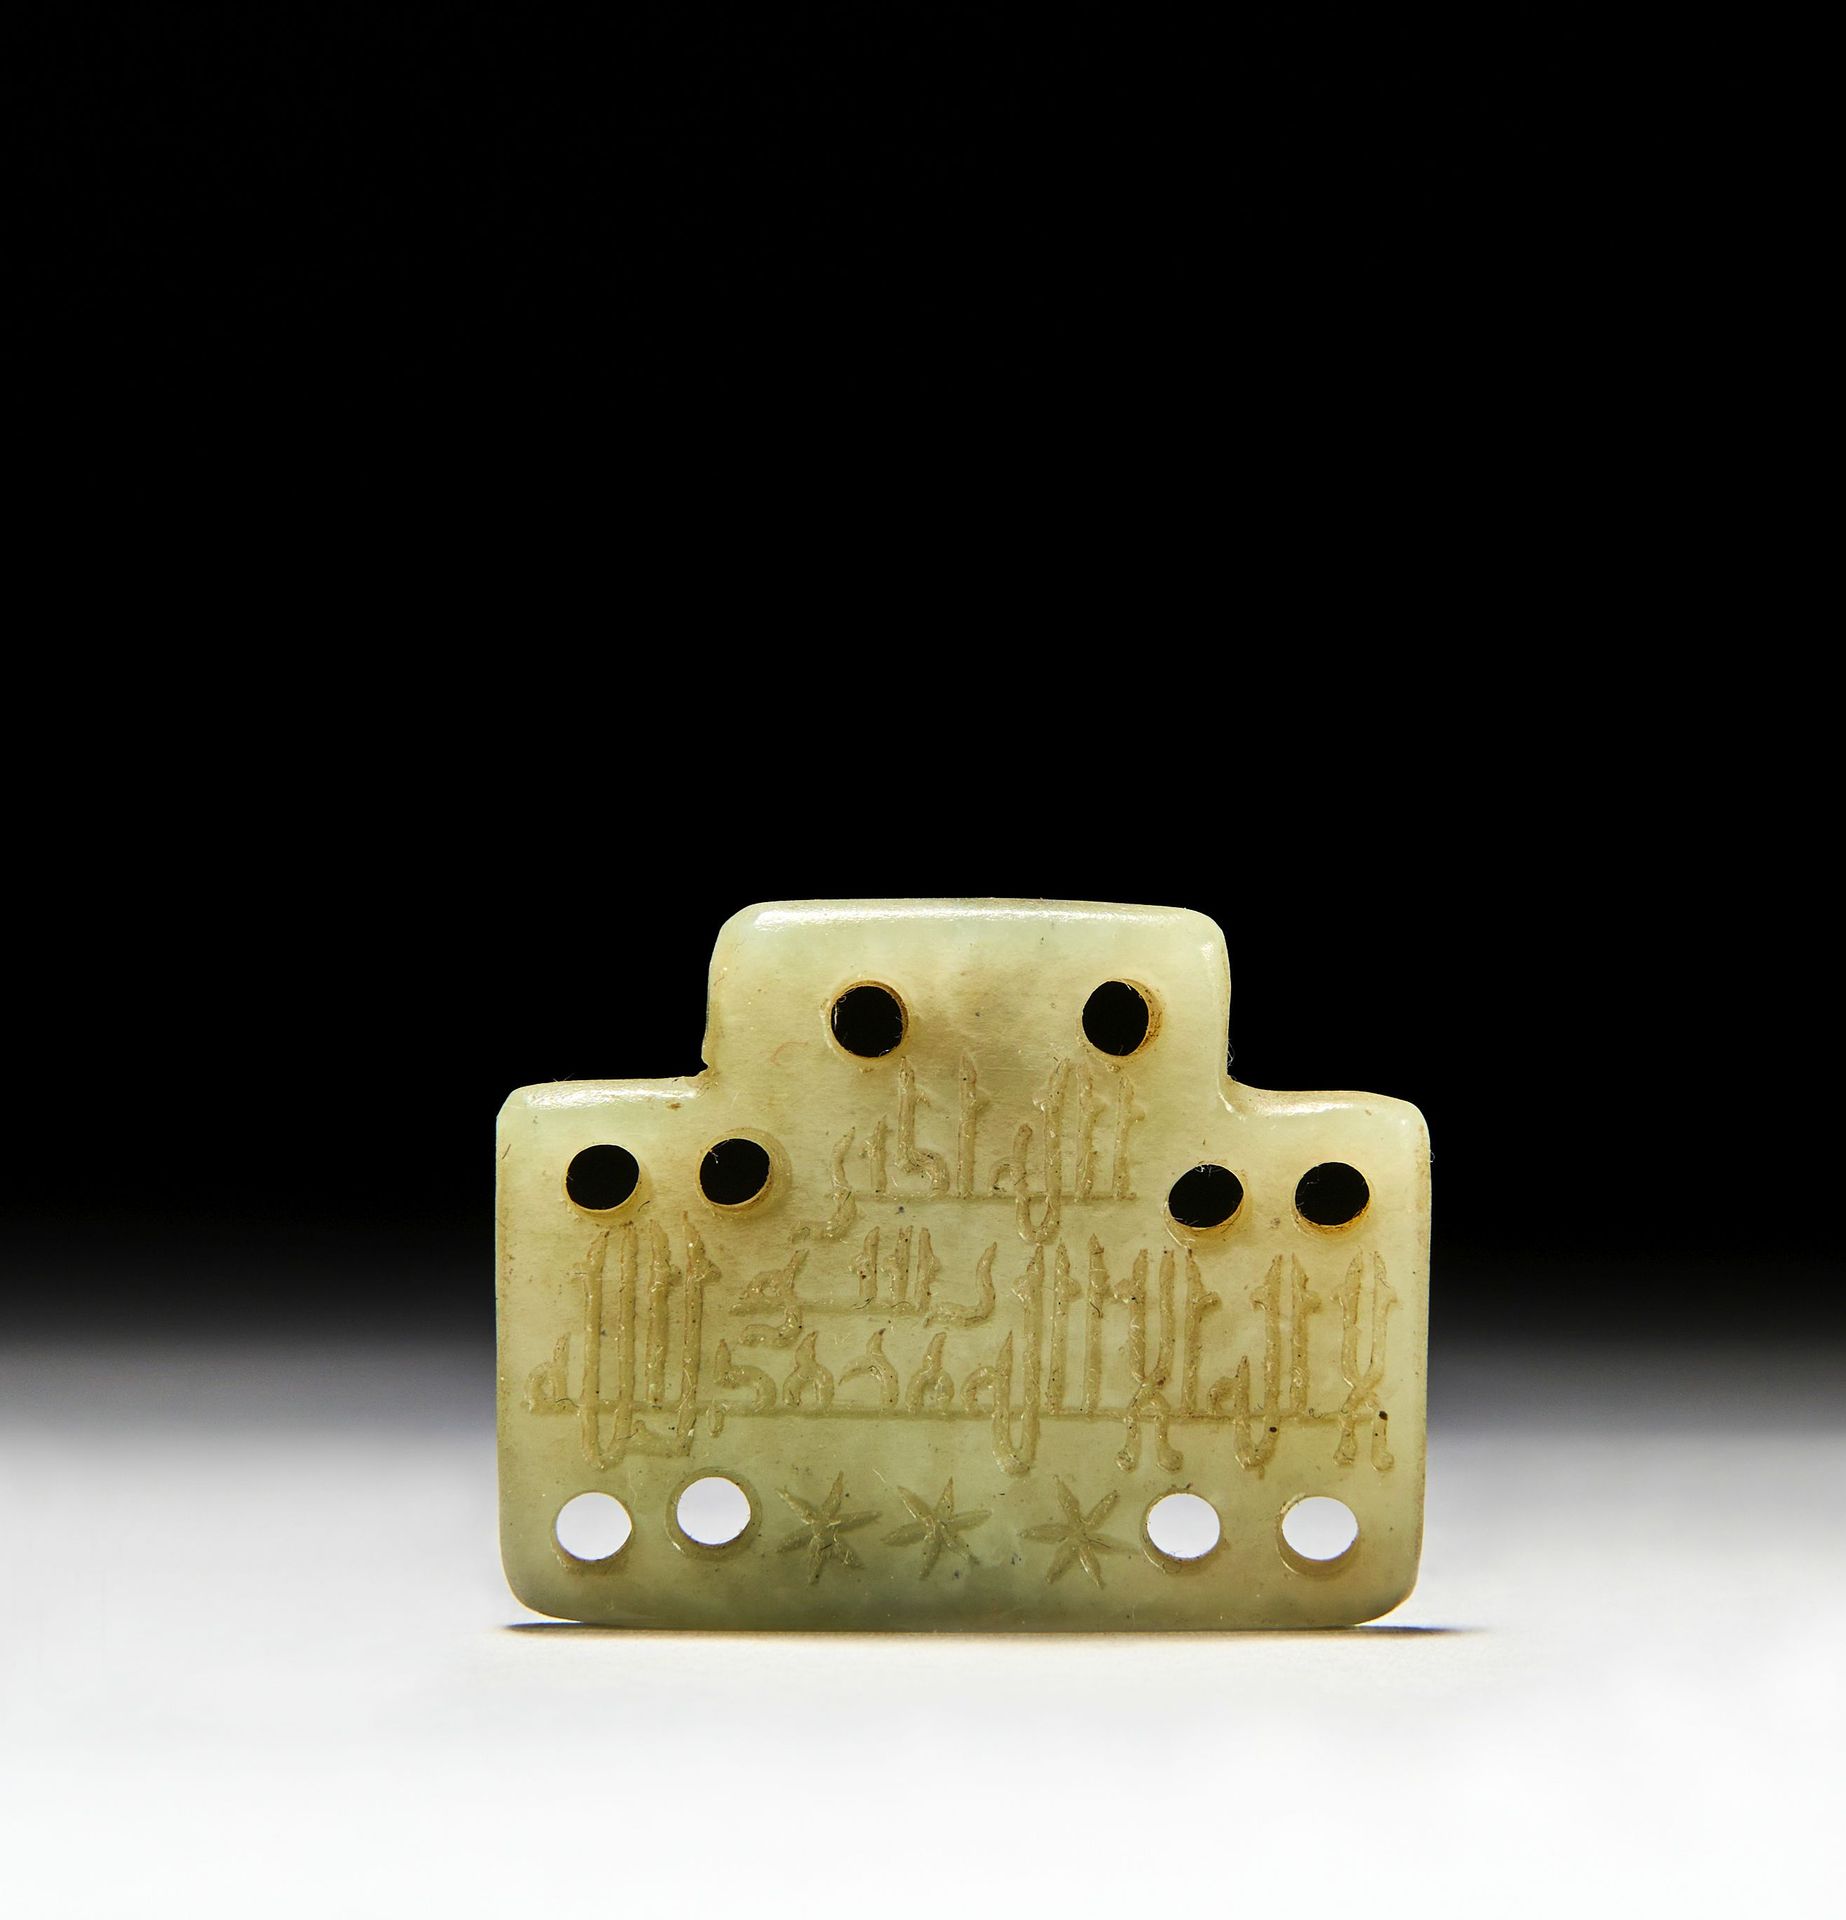 AN ISLAMIC JADE INSCRIBED PENDANT IN KUFIC STYLE TEXT, 19TH CENTURY, PERSIA PEND&hellip;